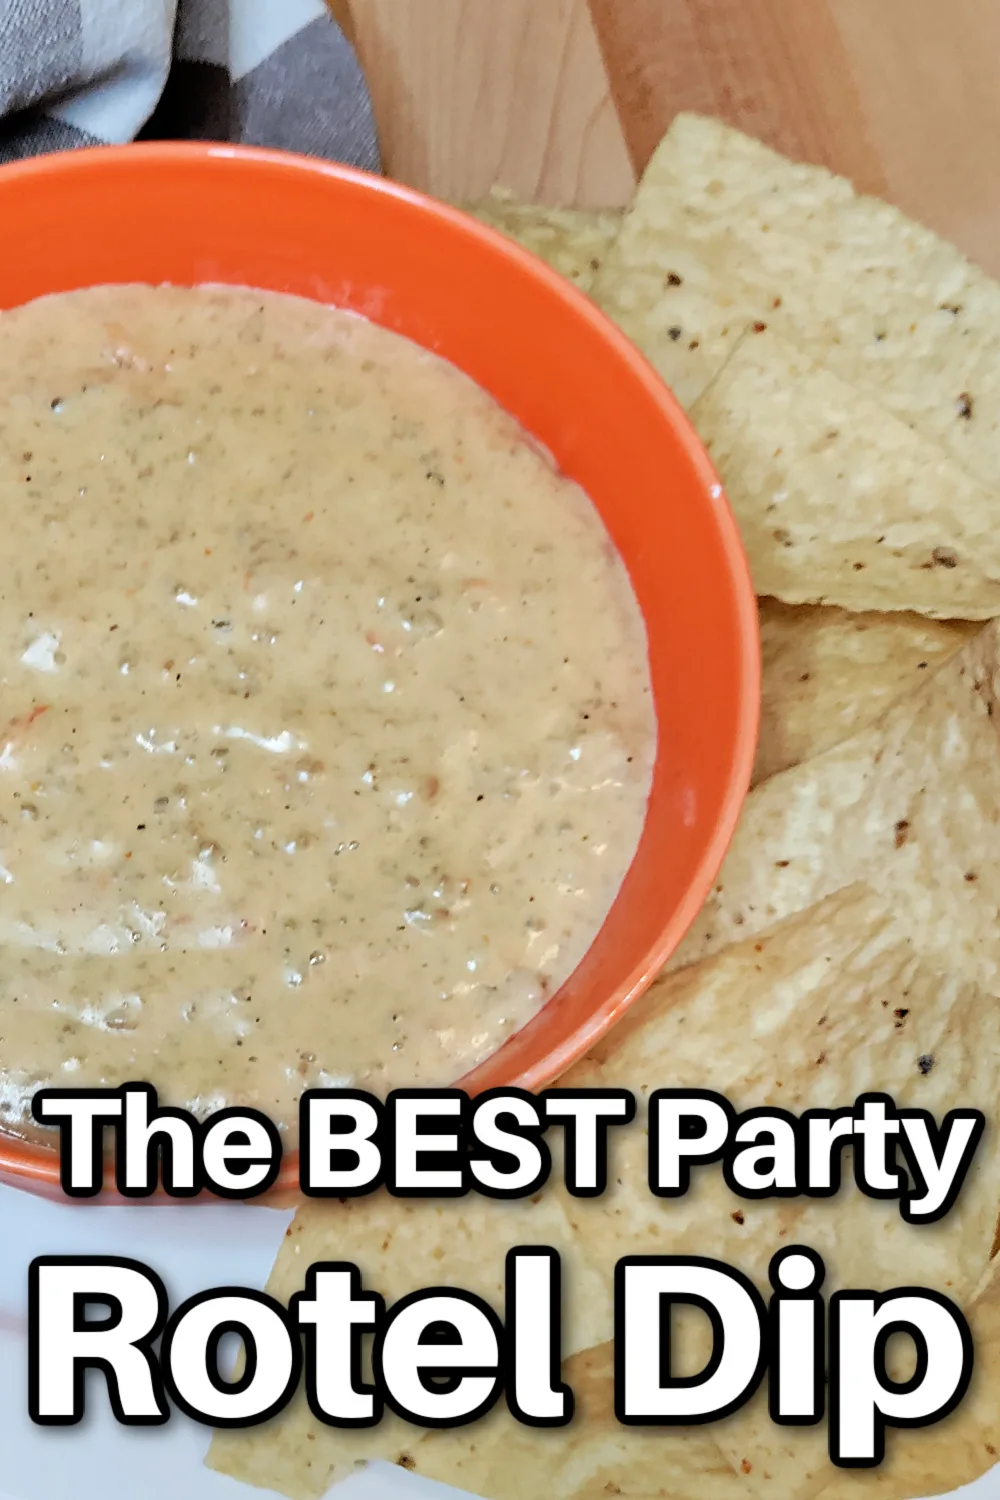 This Rotel dip recipe is so good! It's perfect for your next party! Rotel tomatoes, Velveeta cheese, hamburger, and a few other ingredients combine to make one delicious, cheesy dip!